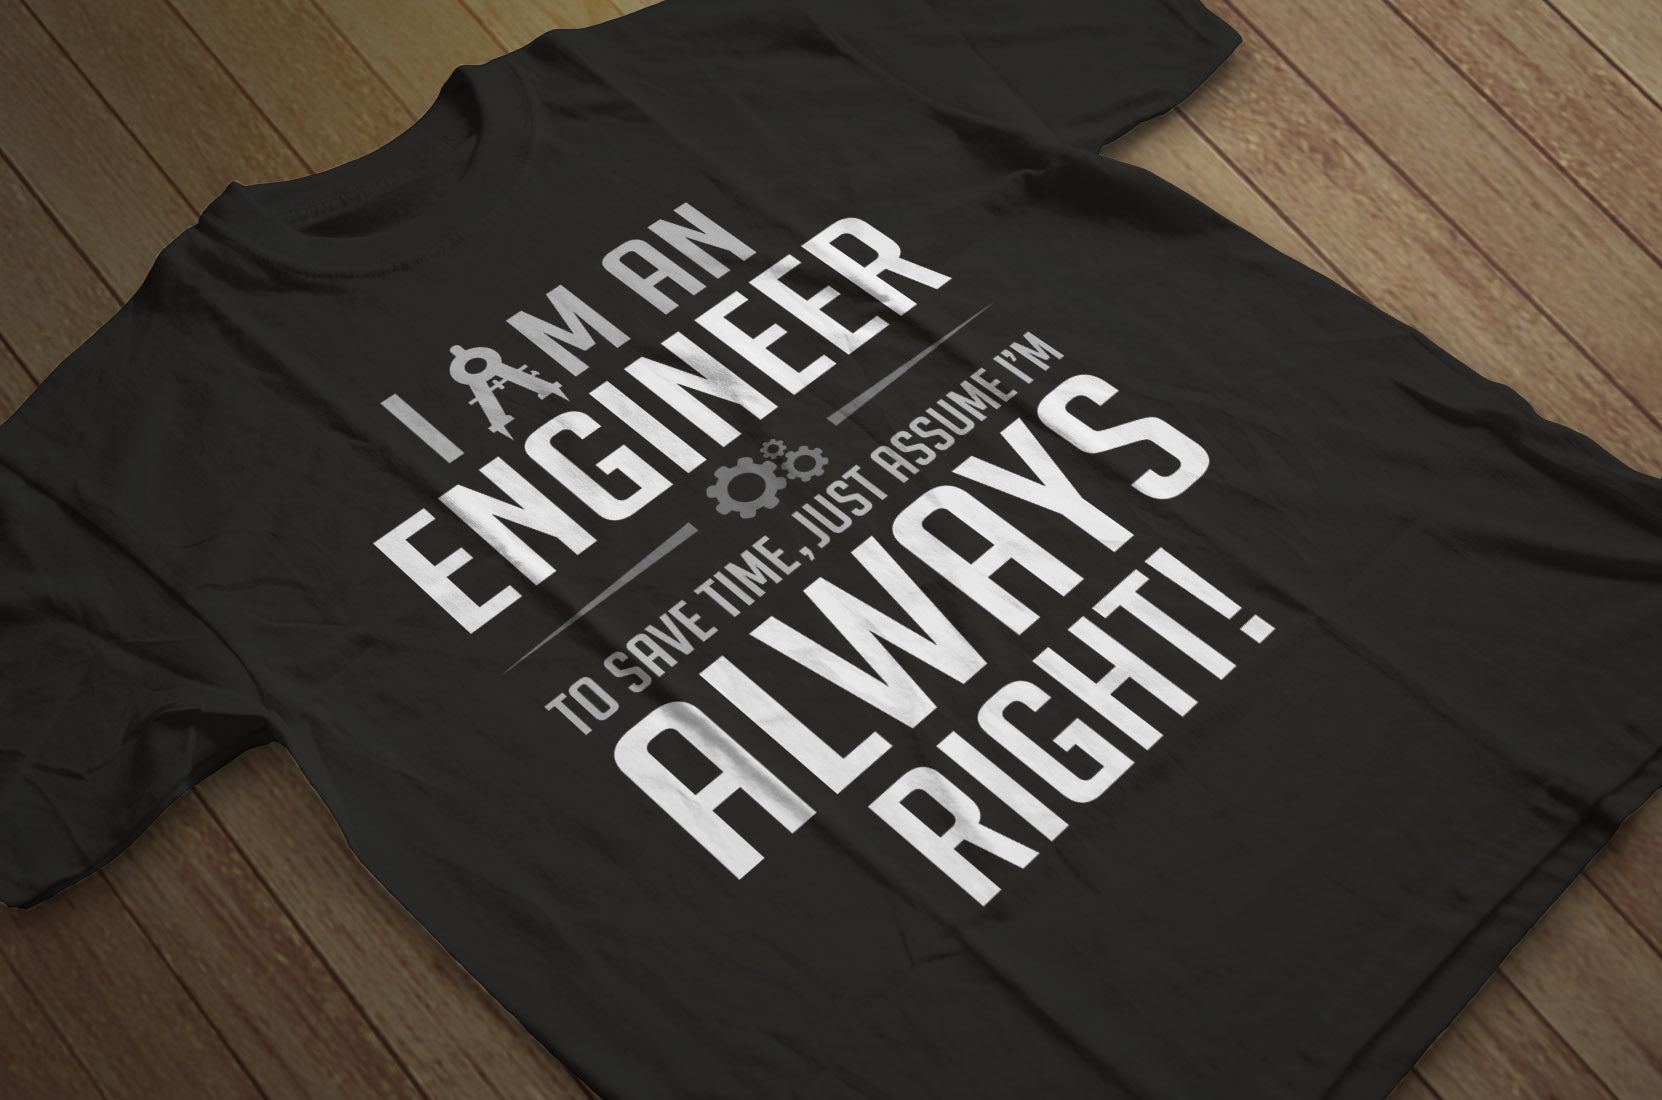 I Am an Engineer To Save Time Just Assume I'm Always Right T-Shirt - Blue 5